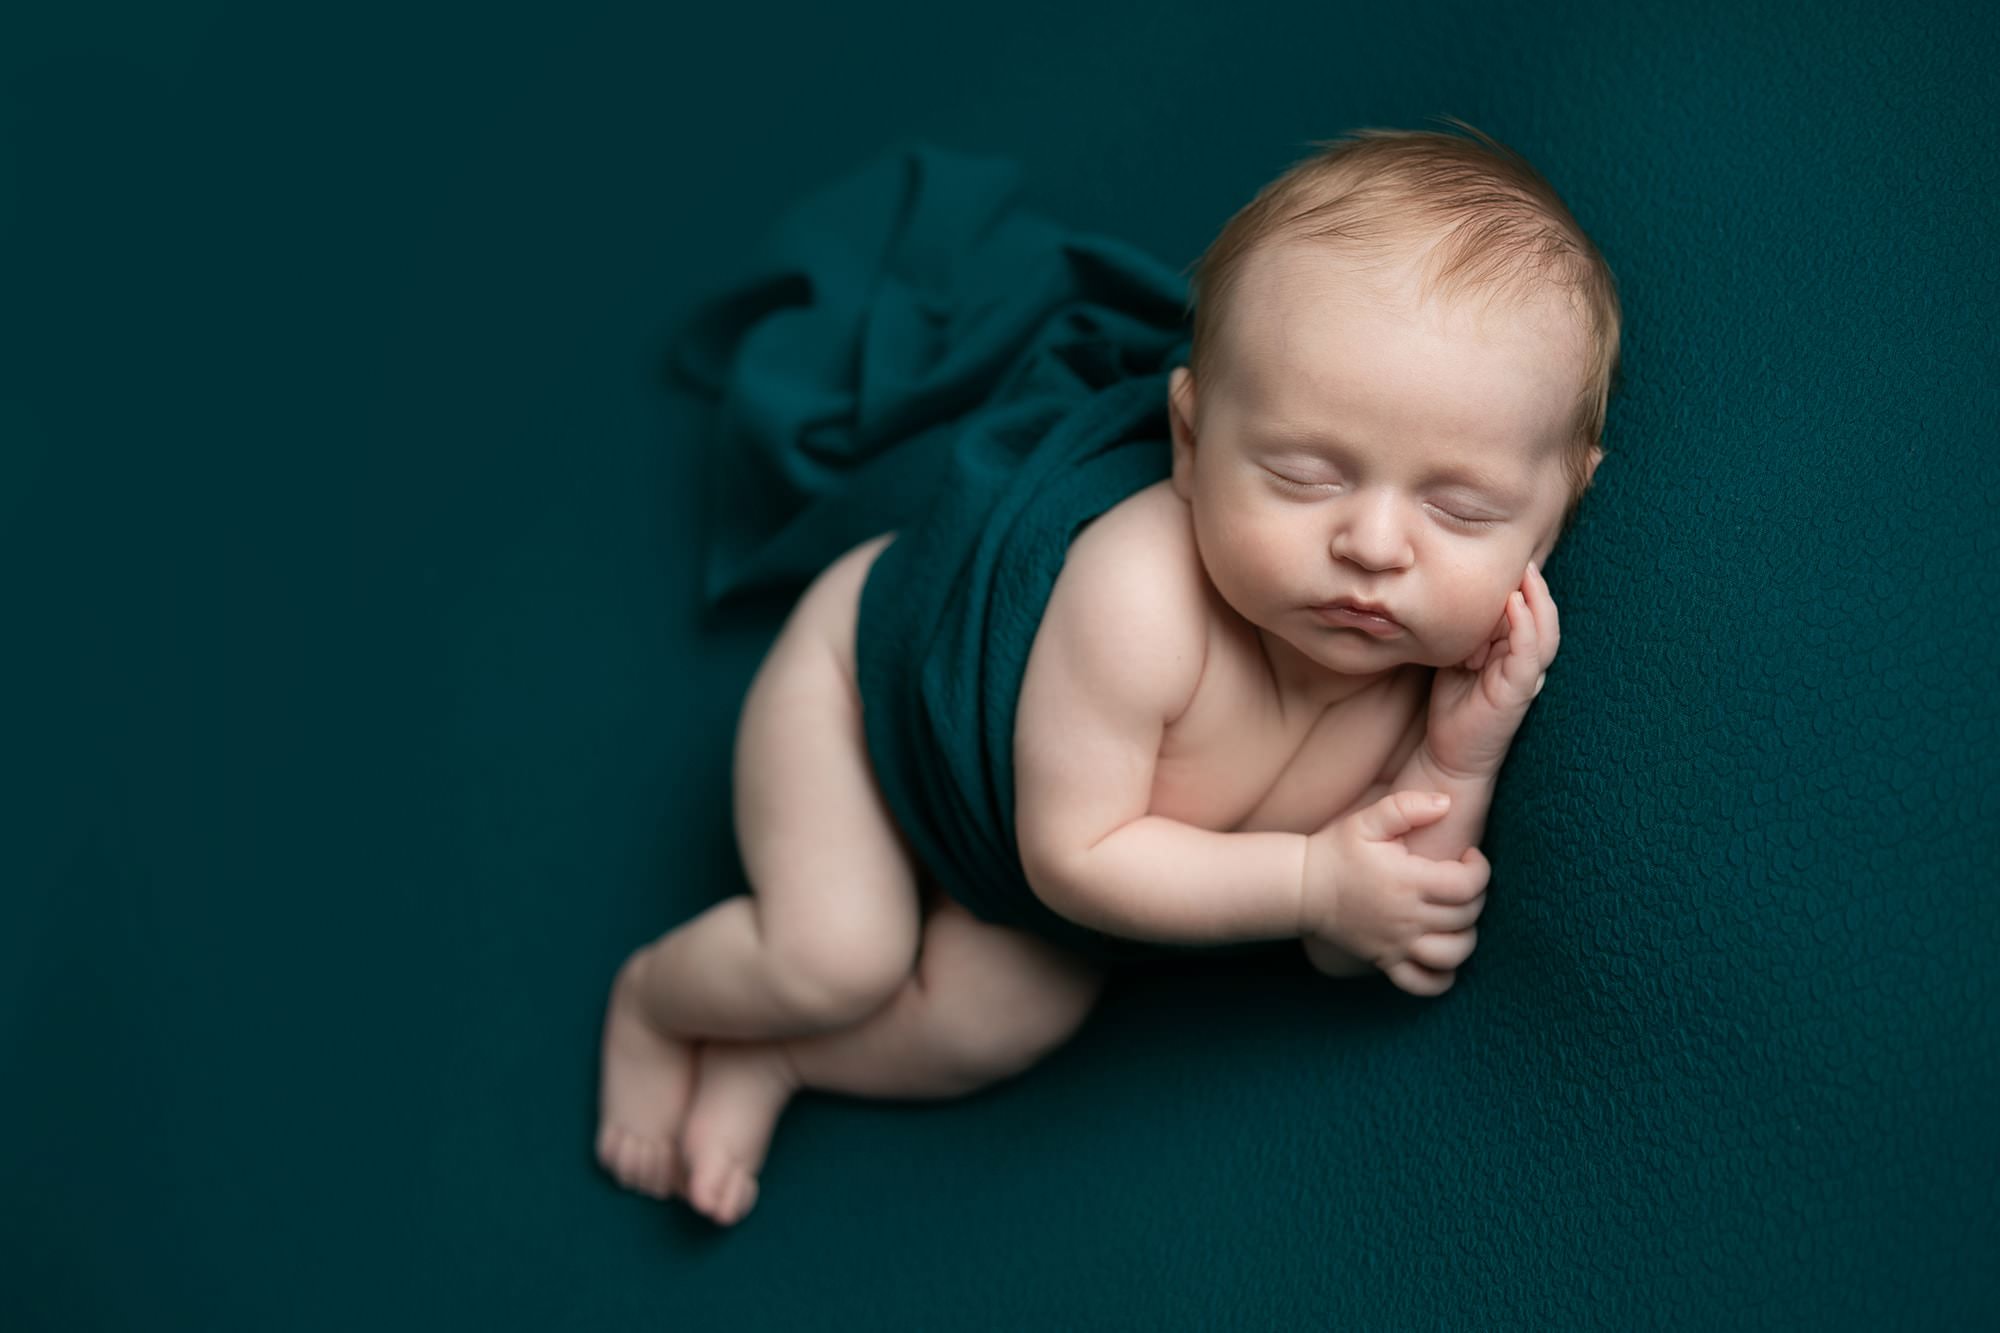 Baby boy lying on his side on a jade green backdrop, with a wrap around his tummy. Image taken by Glasgow photographer during newborn photography session